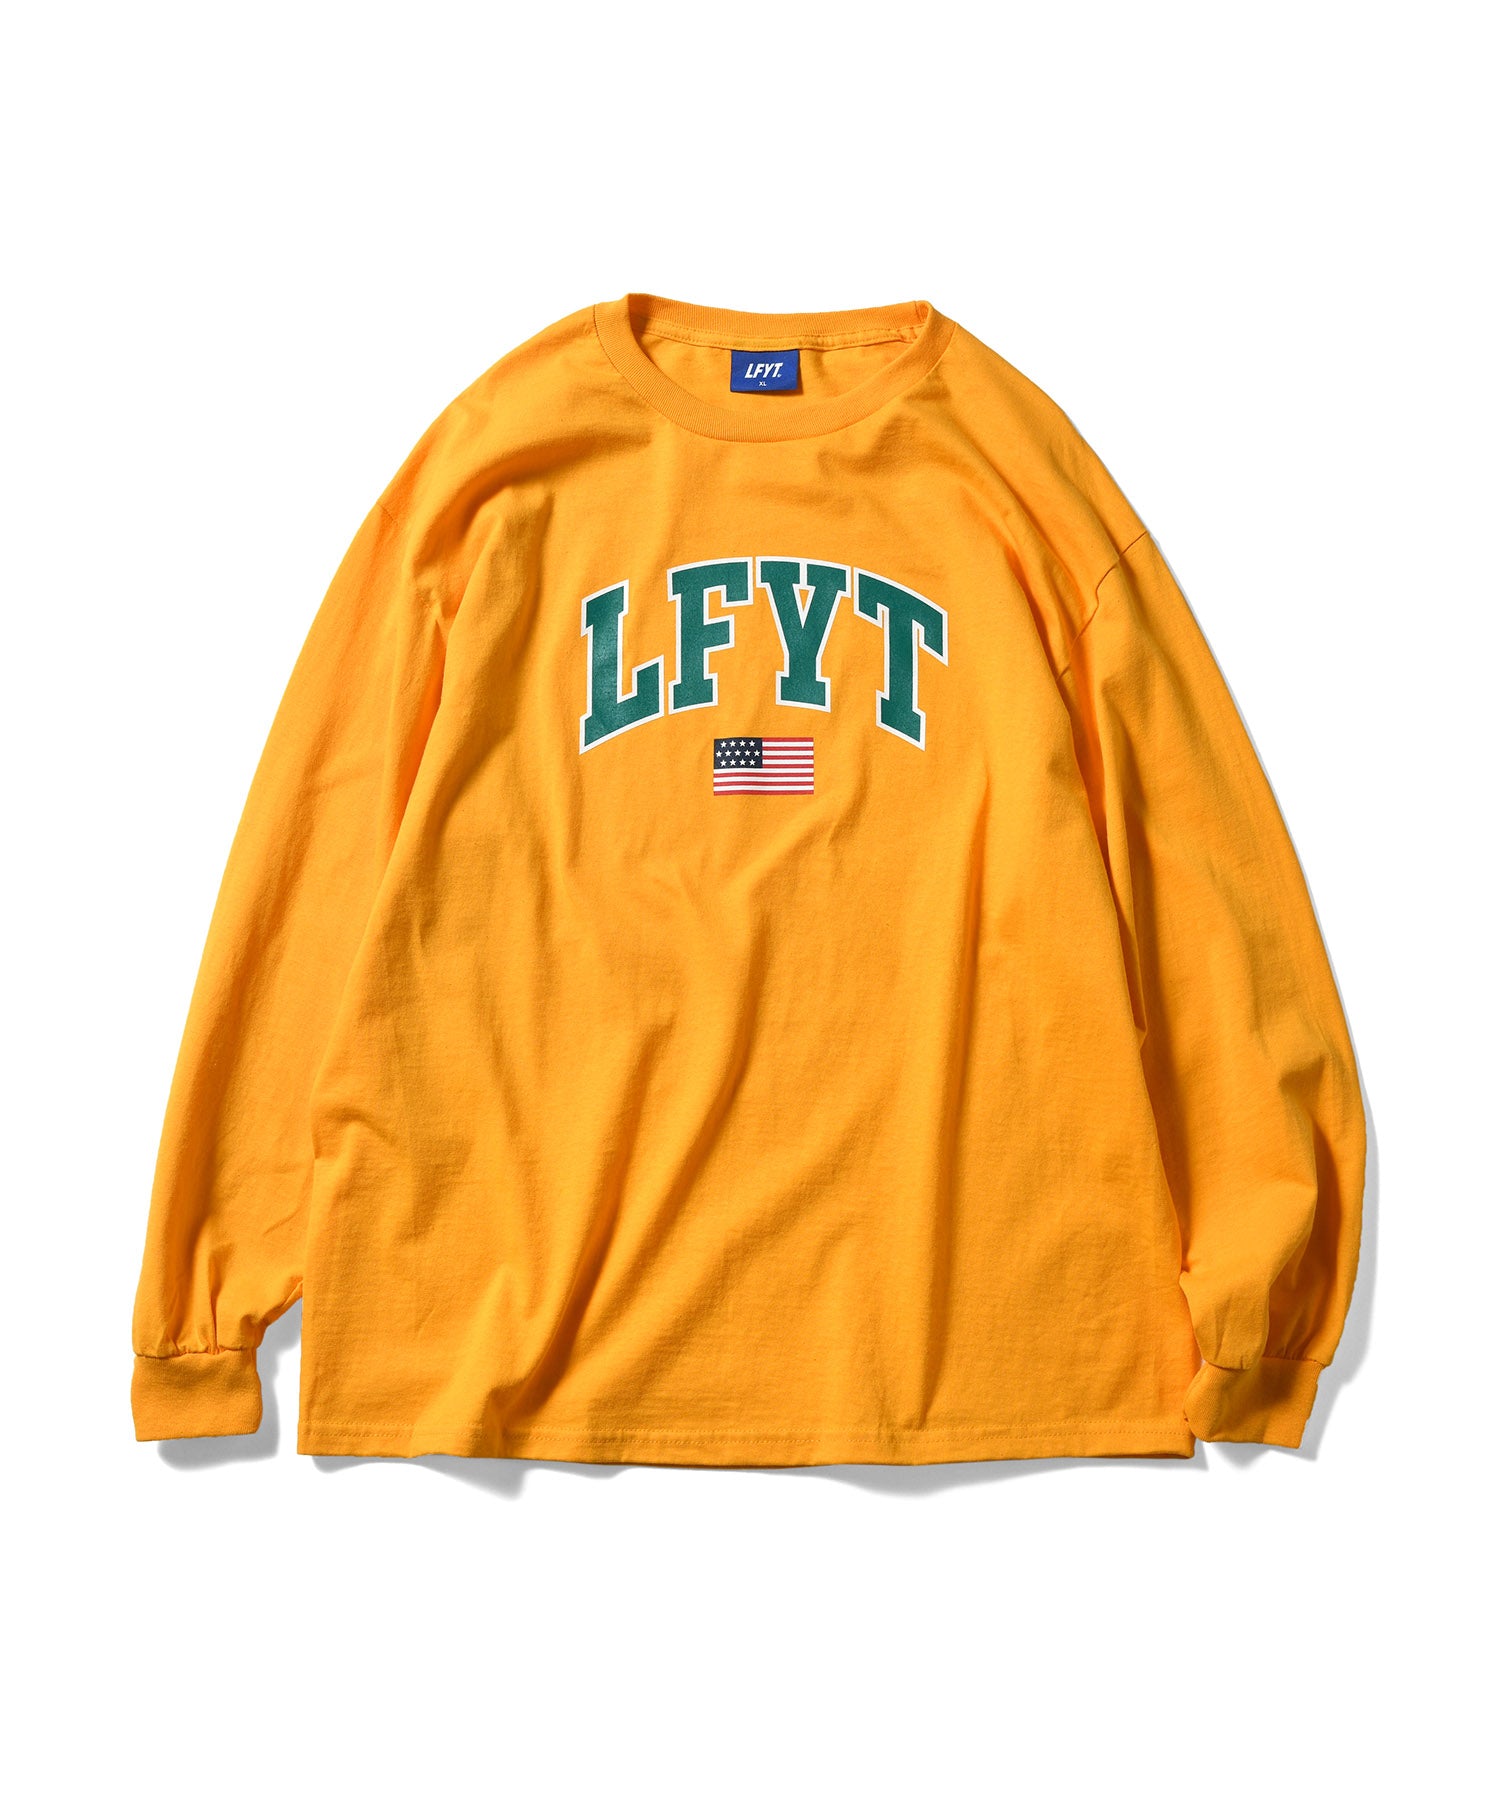 LFYT OLD GLORY ARCH LOGO L/S TEE LS220103 YELLOW